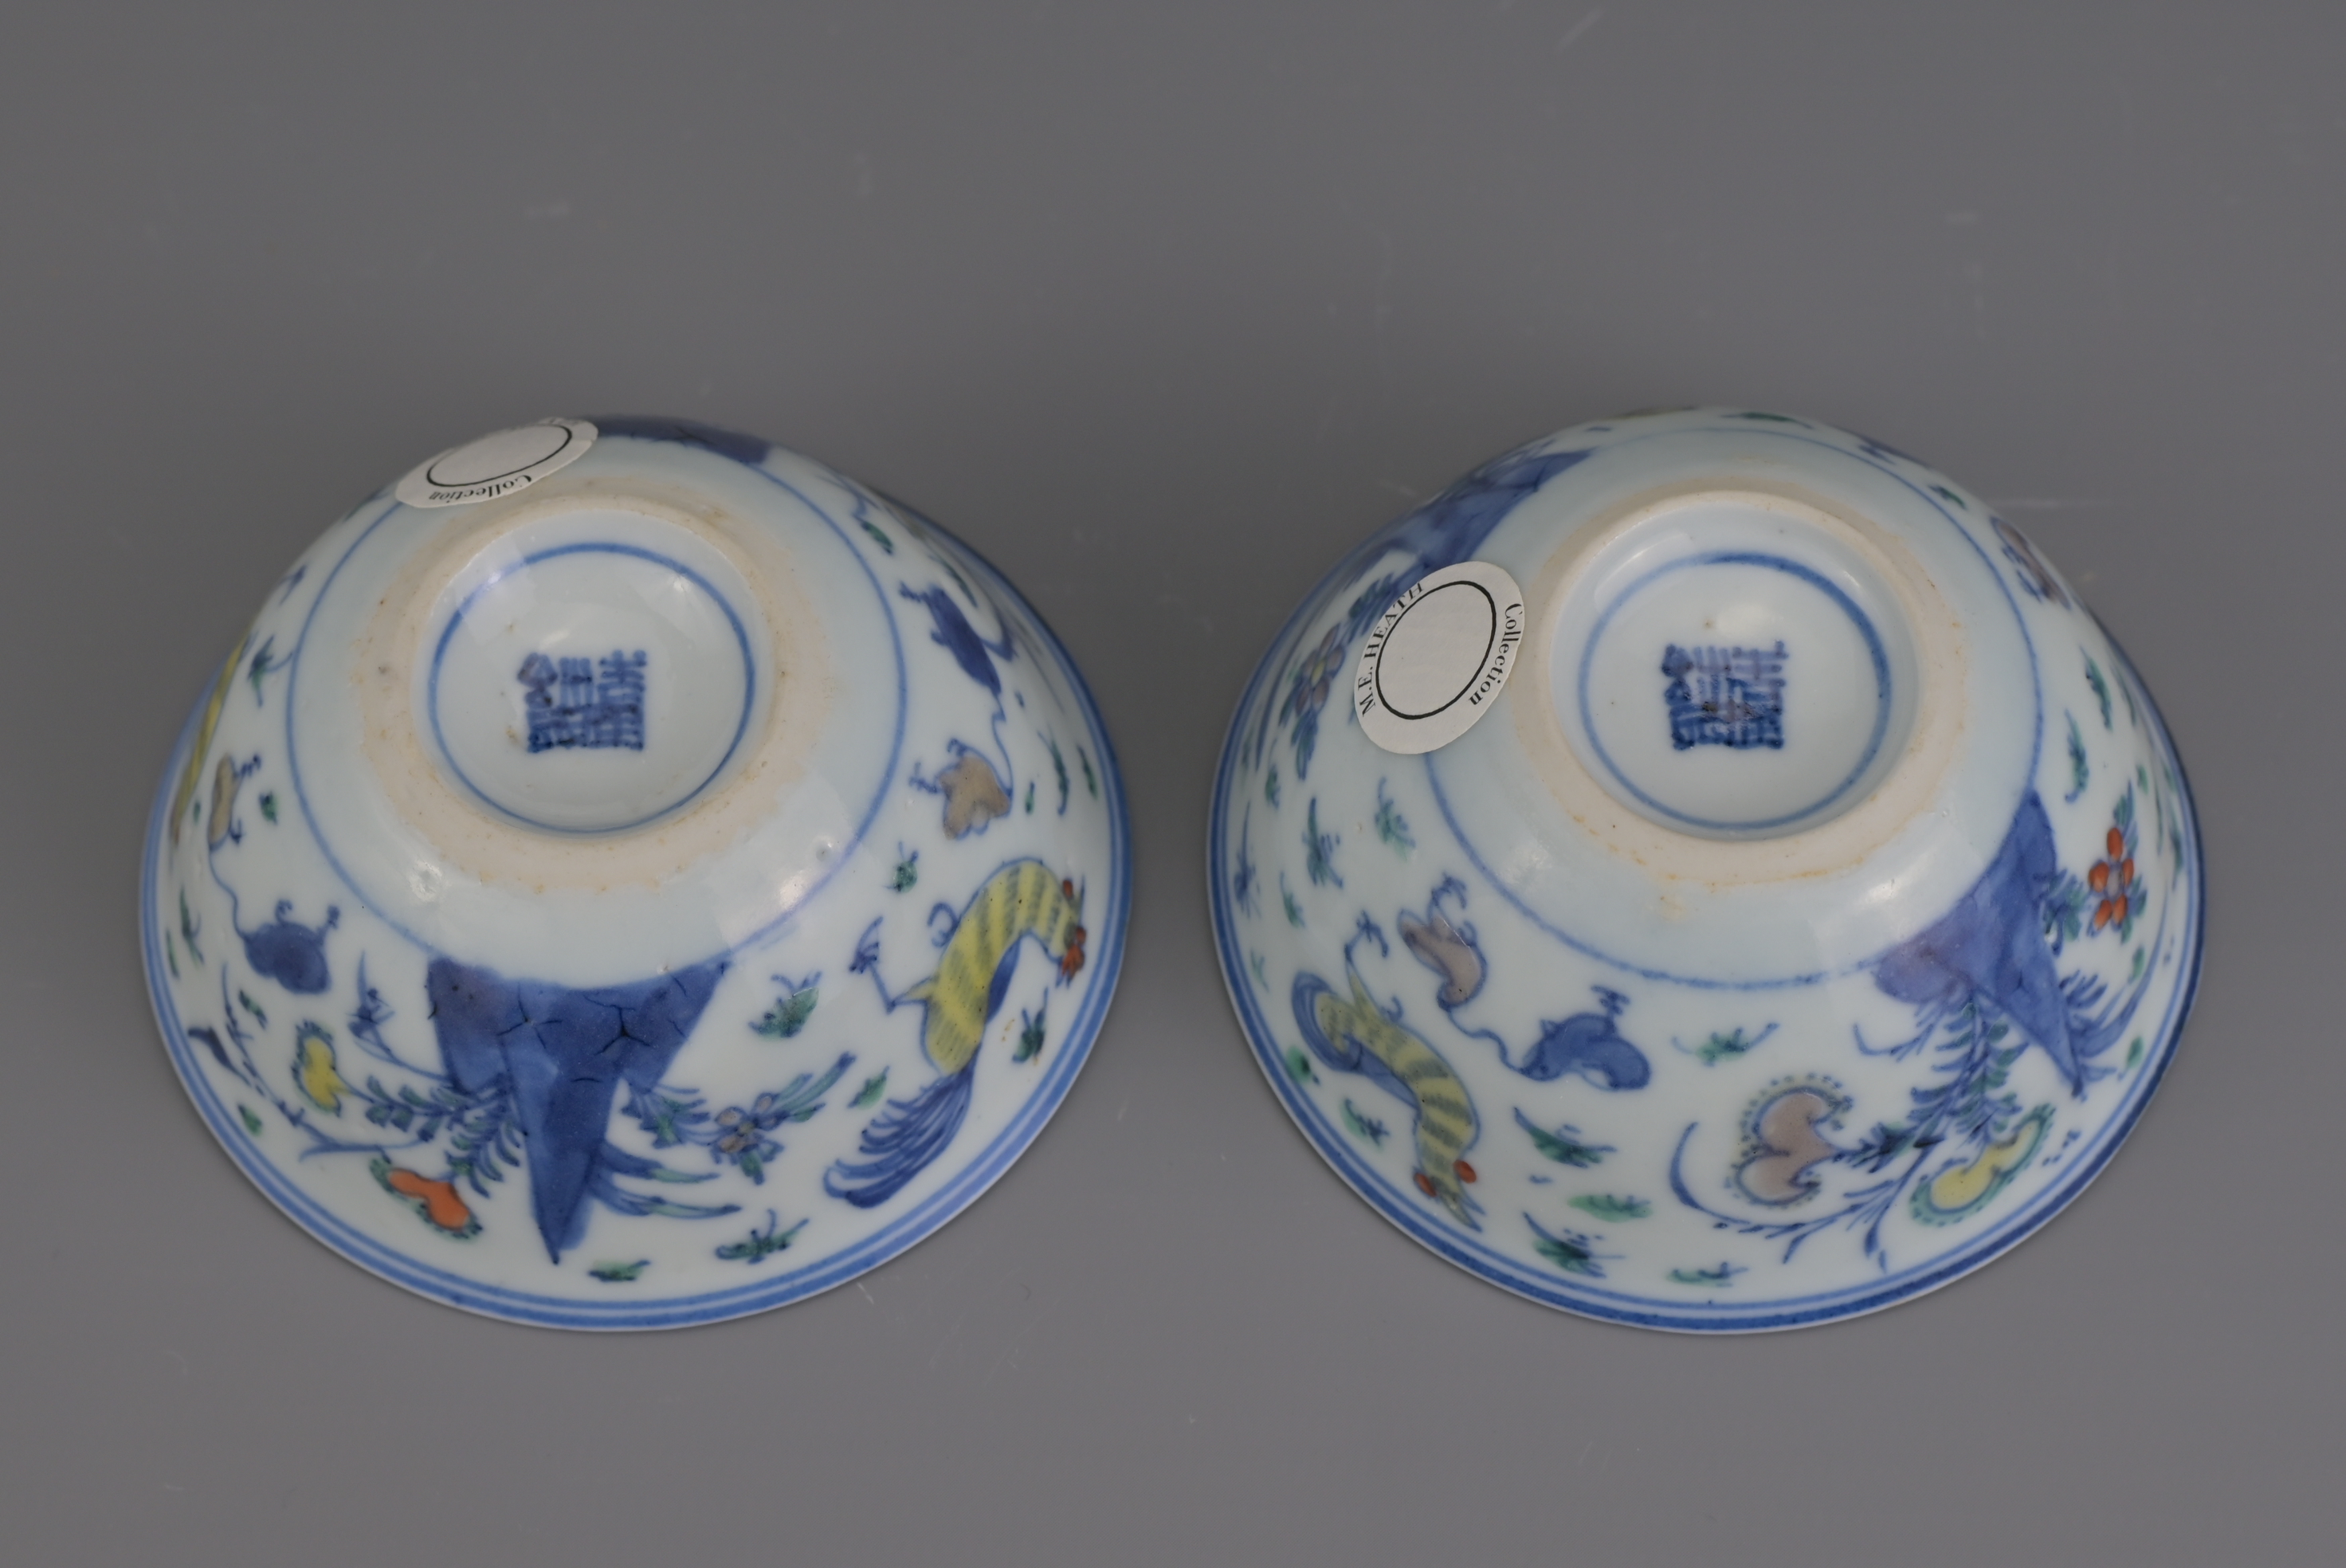 PAIR OF CHINESE DOUCAI PORCELAIN ‘CHICKEN’ CUPS, KANGXI PERIOD, 18th CENTURY - Image 5 of 8